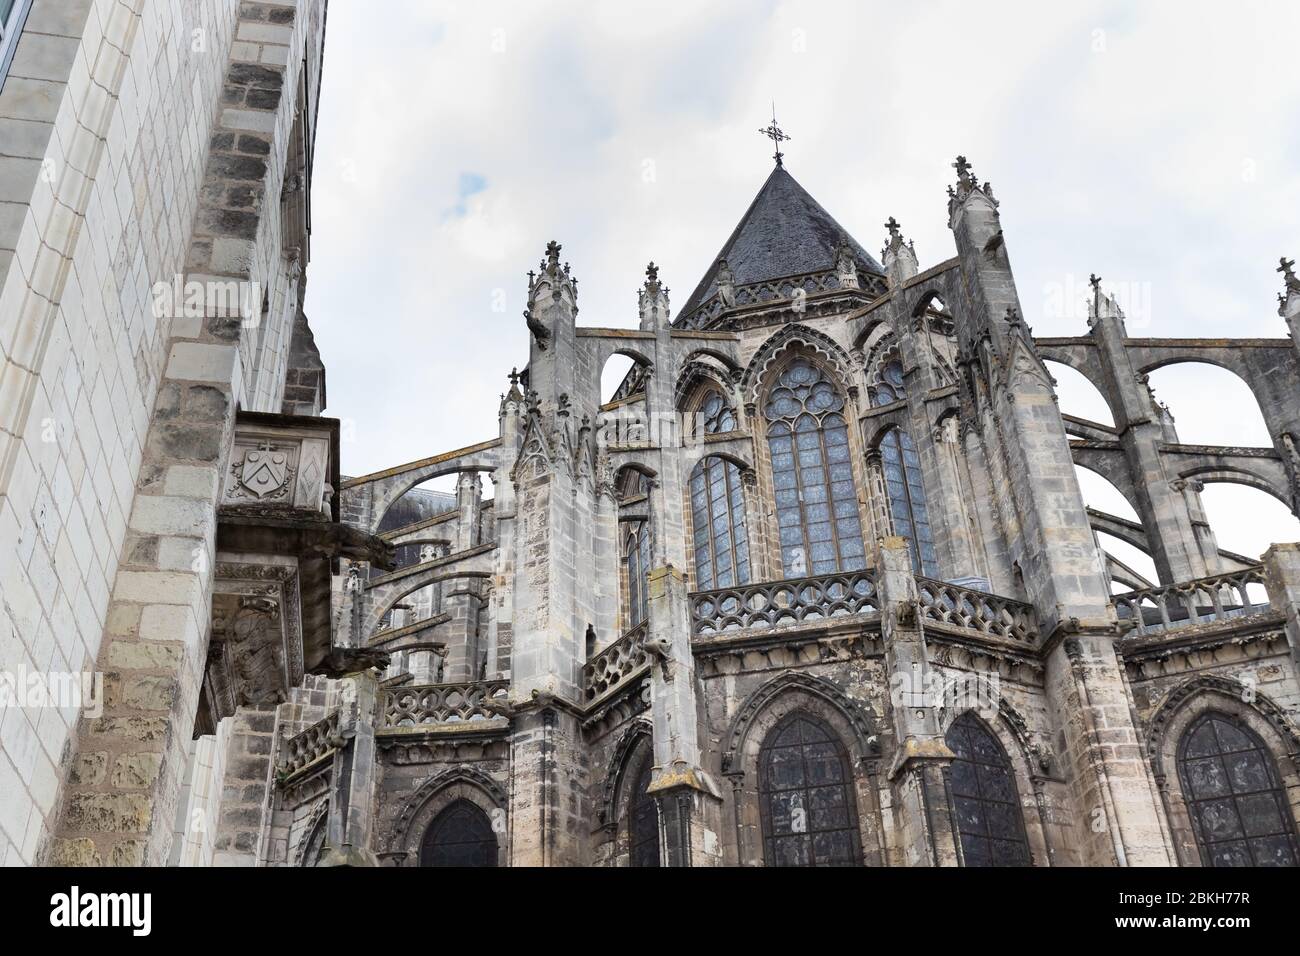 architectural detail of the Roman Catholic cathedral Saint Gatien in Tours, Indre et Loire, France Stock Photo